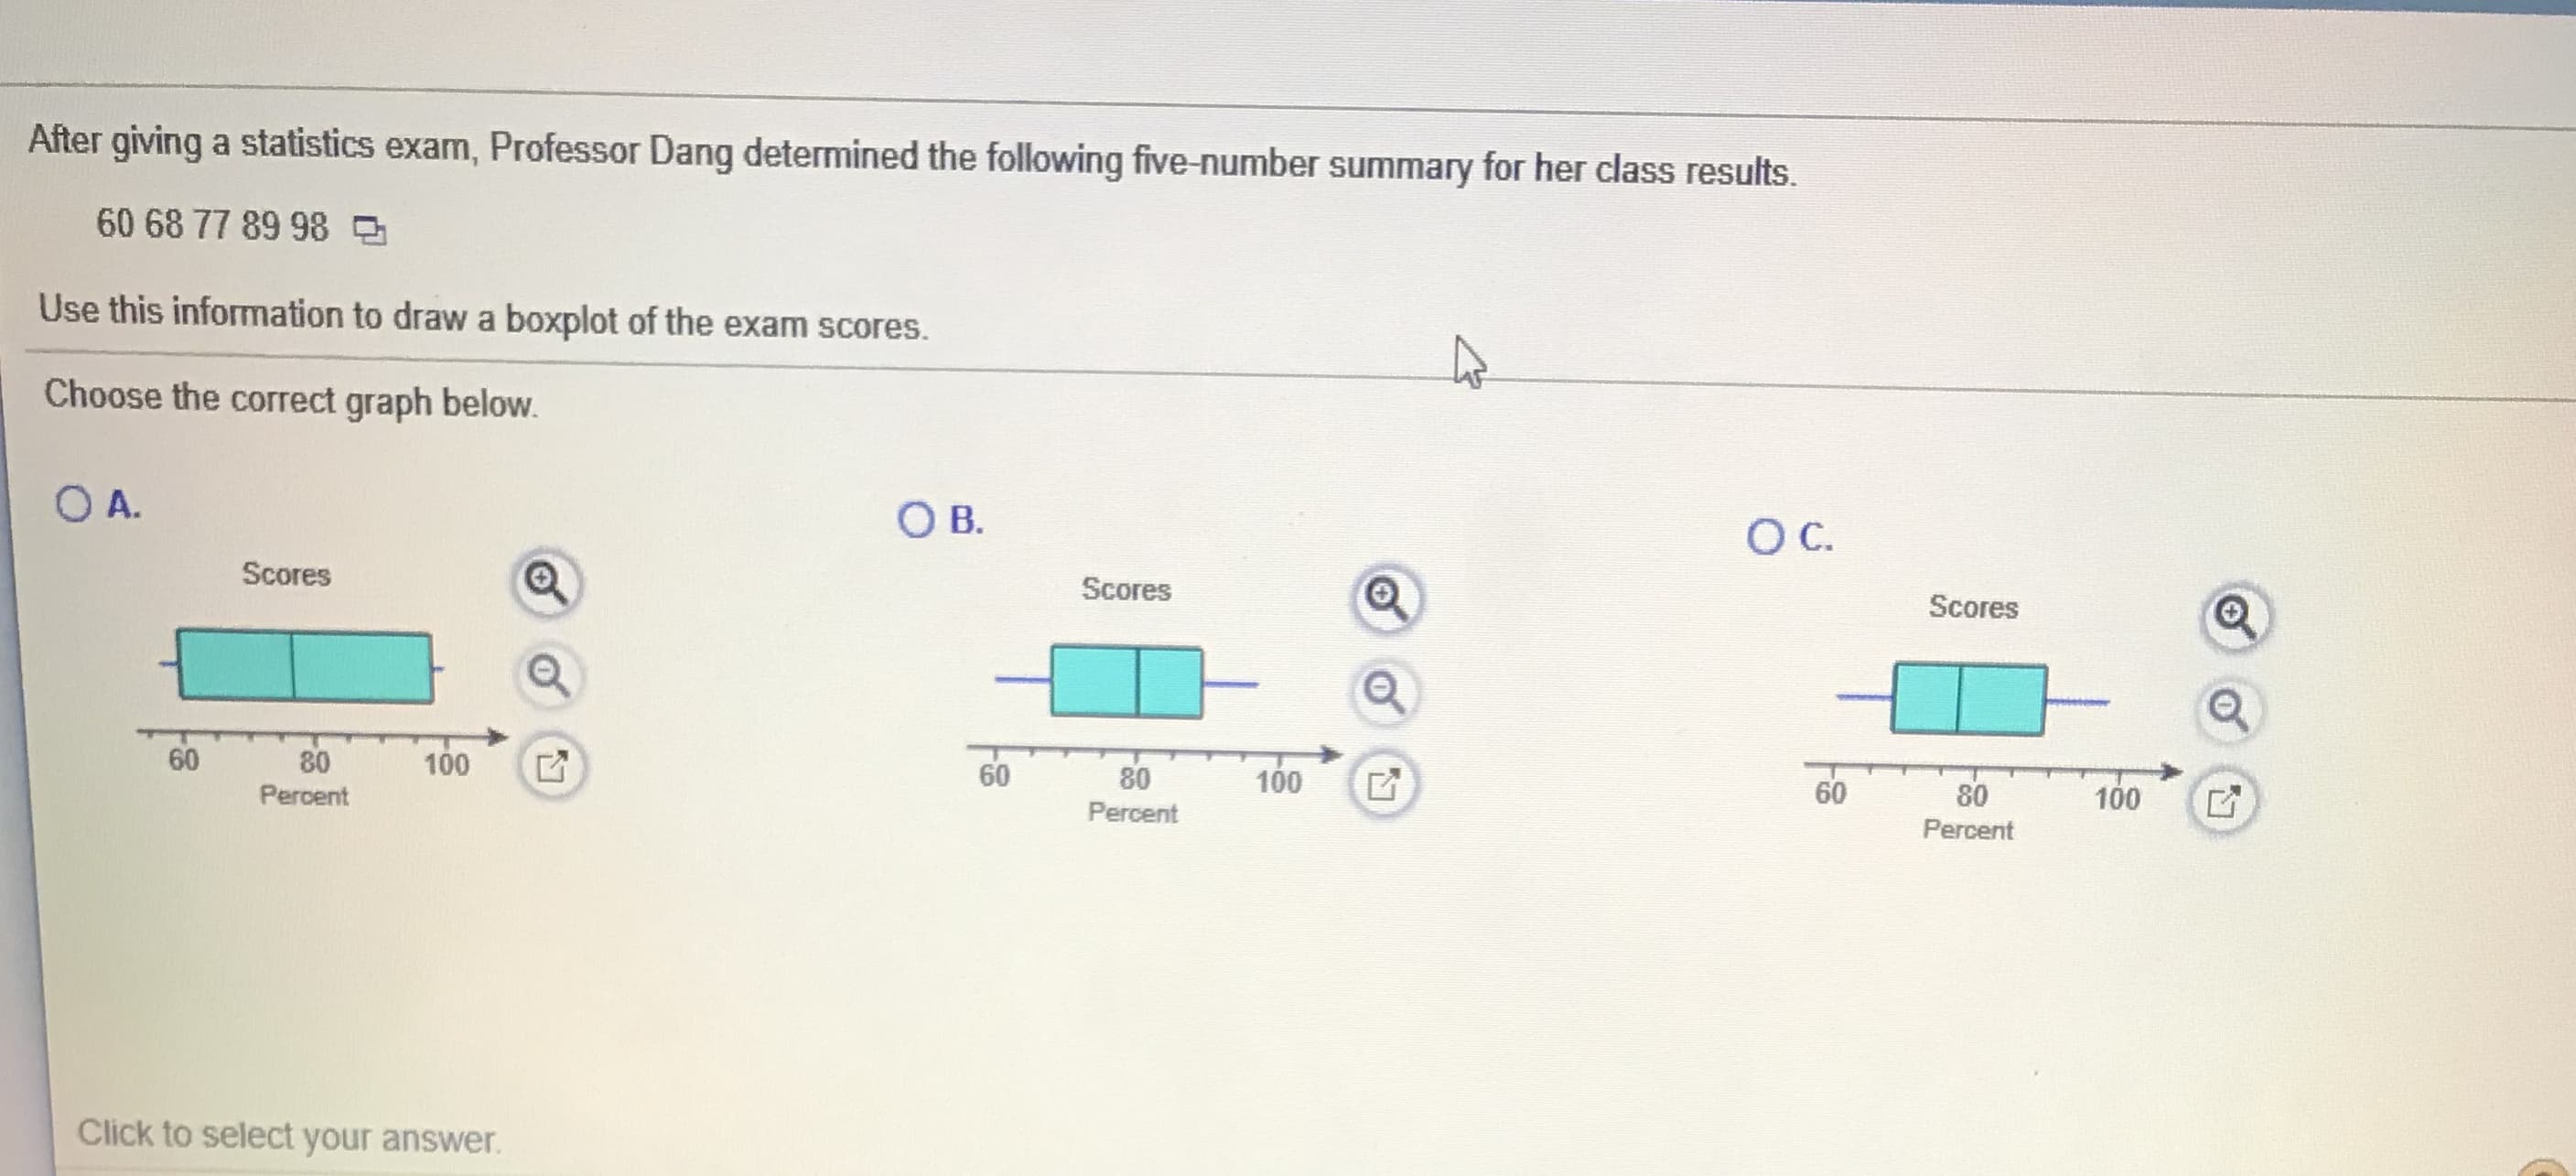 After giving a statistics exam, Professor Dang determined the following five-number summary for her class results.
60 68 77 89 98
Use this information to draw a boxplot of the exam scores.
Choose the correct graph below.
O A.
O B.
OC.
Scores
Scores
Scores
60
80
100
60
80
100
Percent
60
80
100
Percent
Percent
